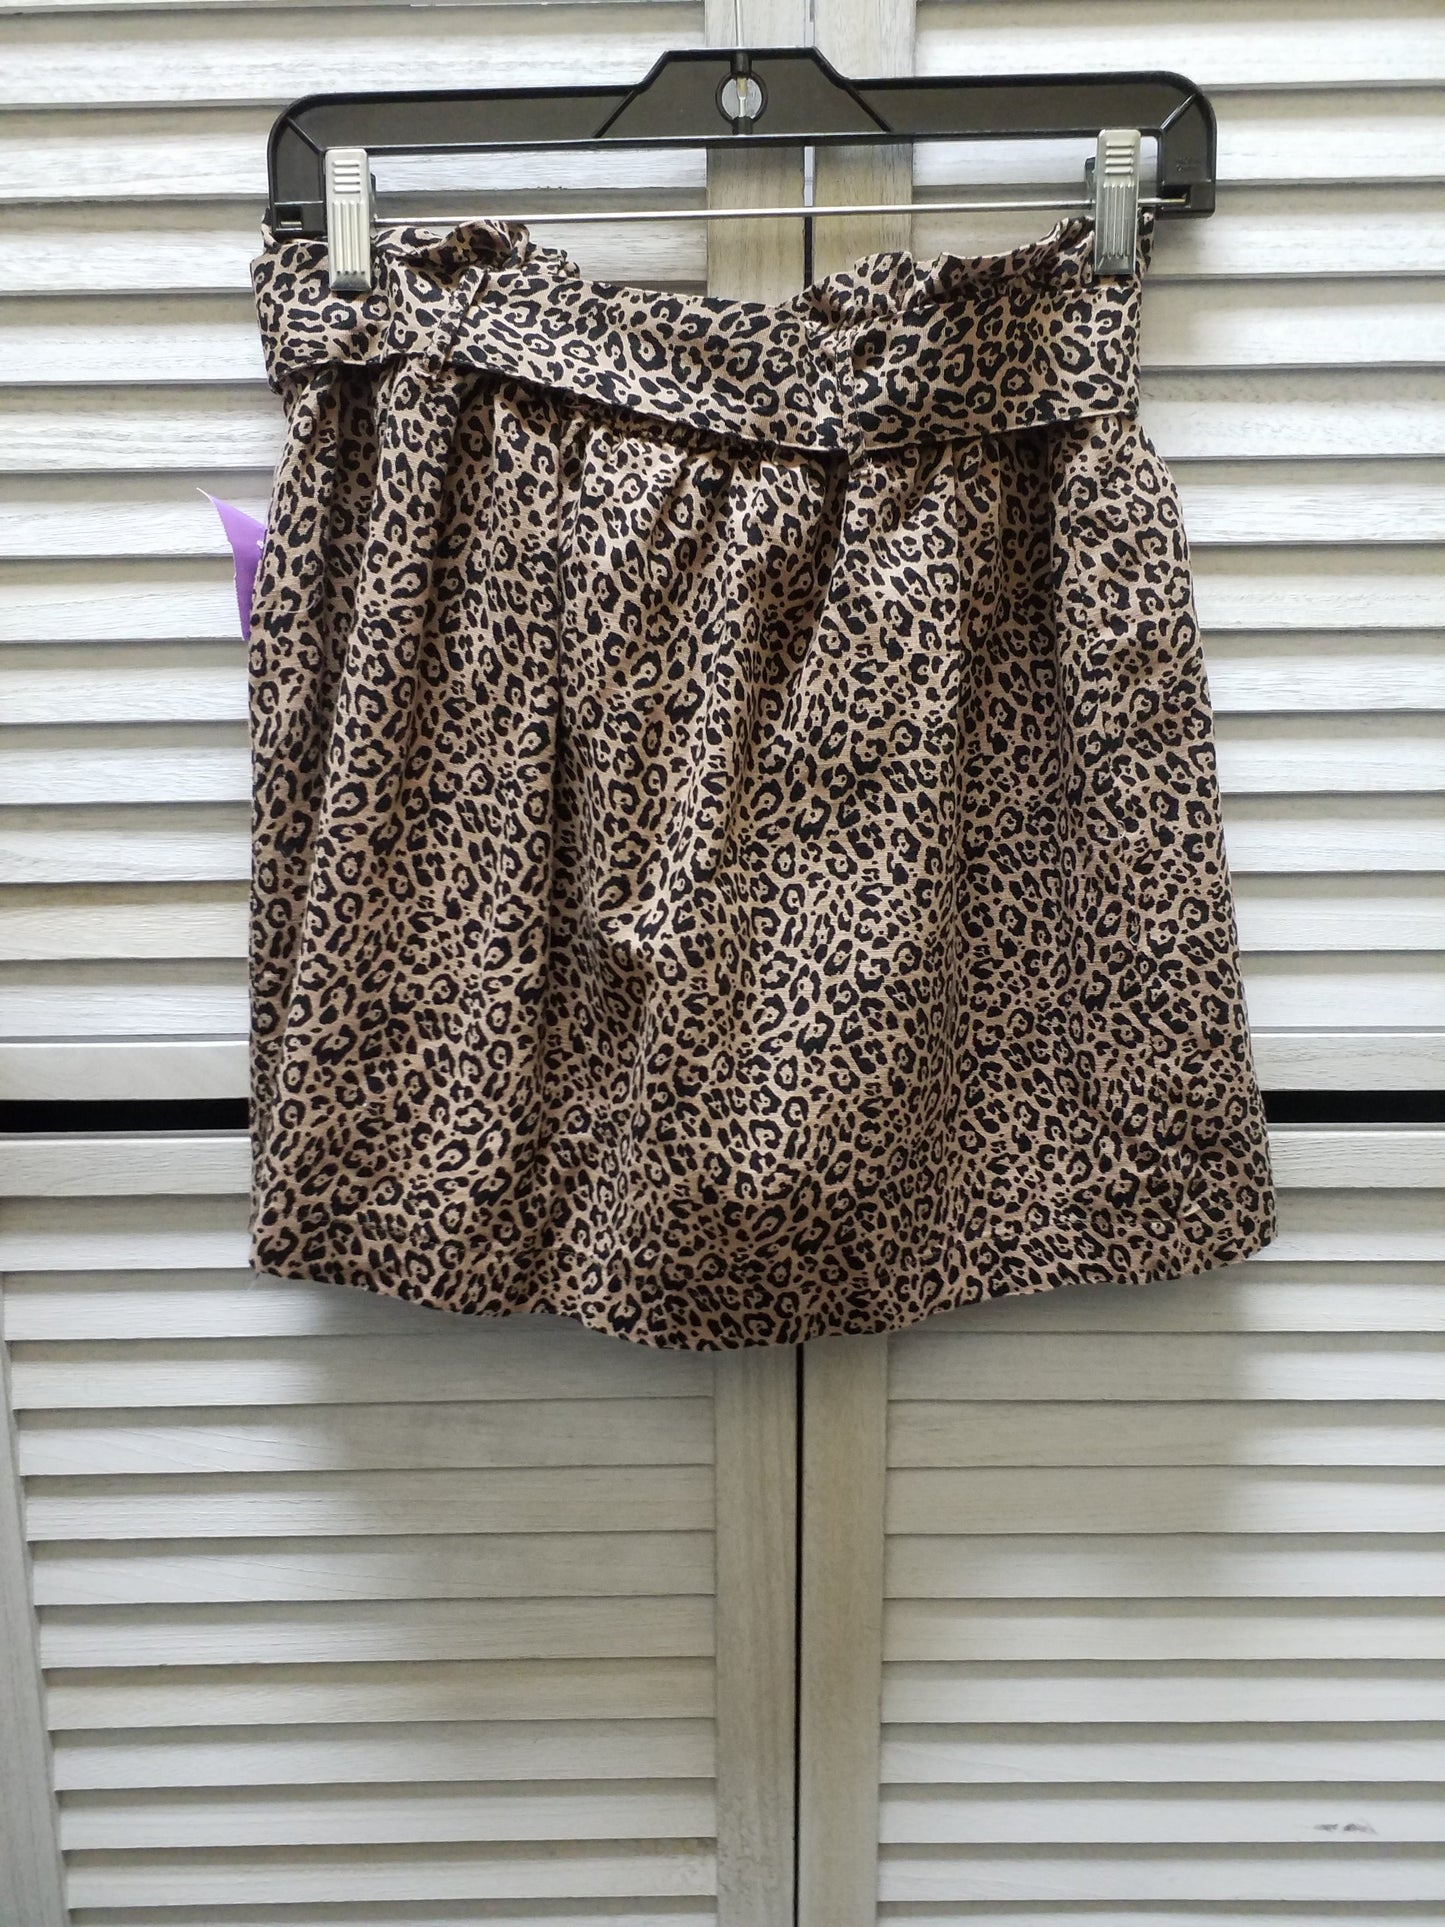 Skirt Mini & Short By American Eagle  Size: M